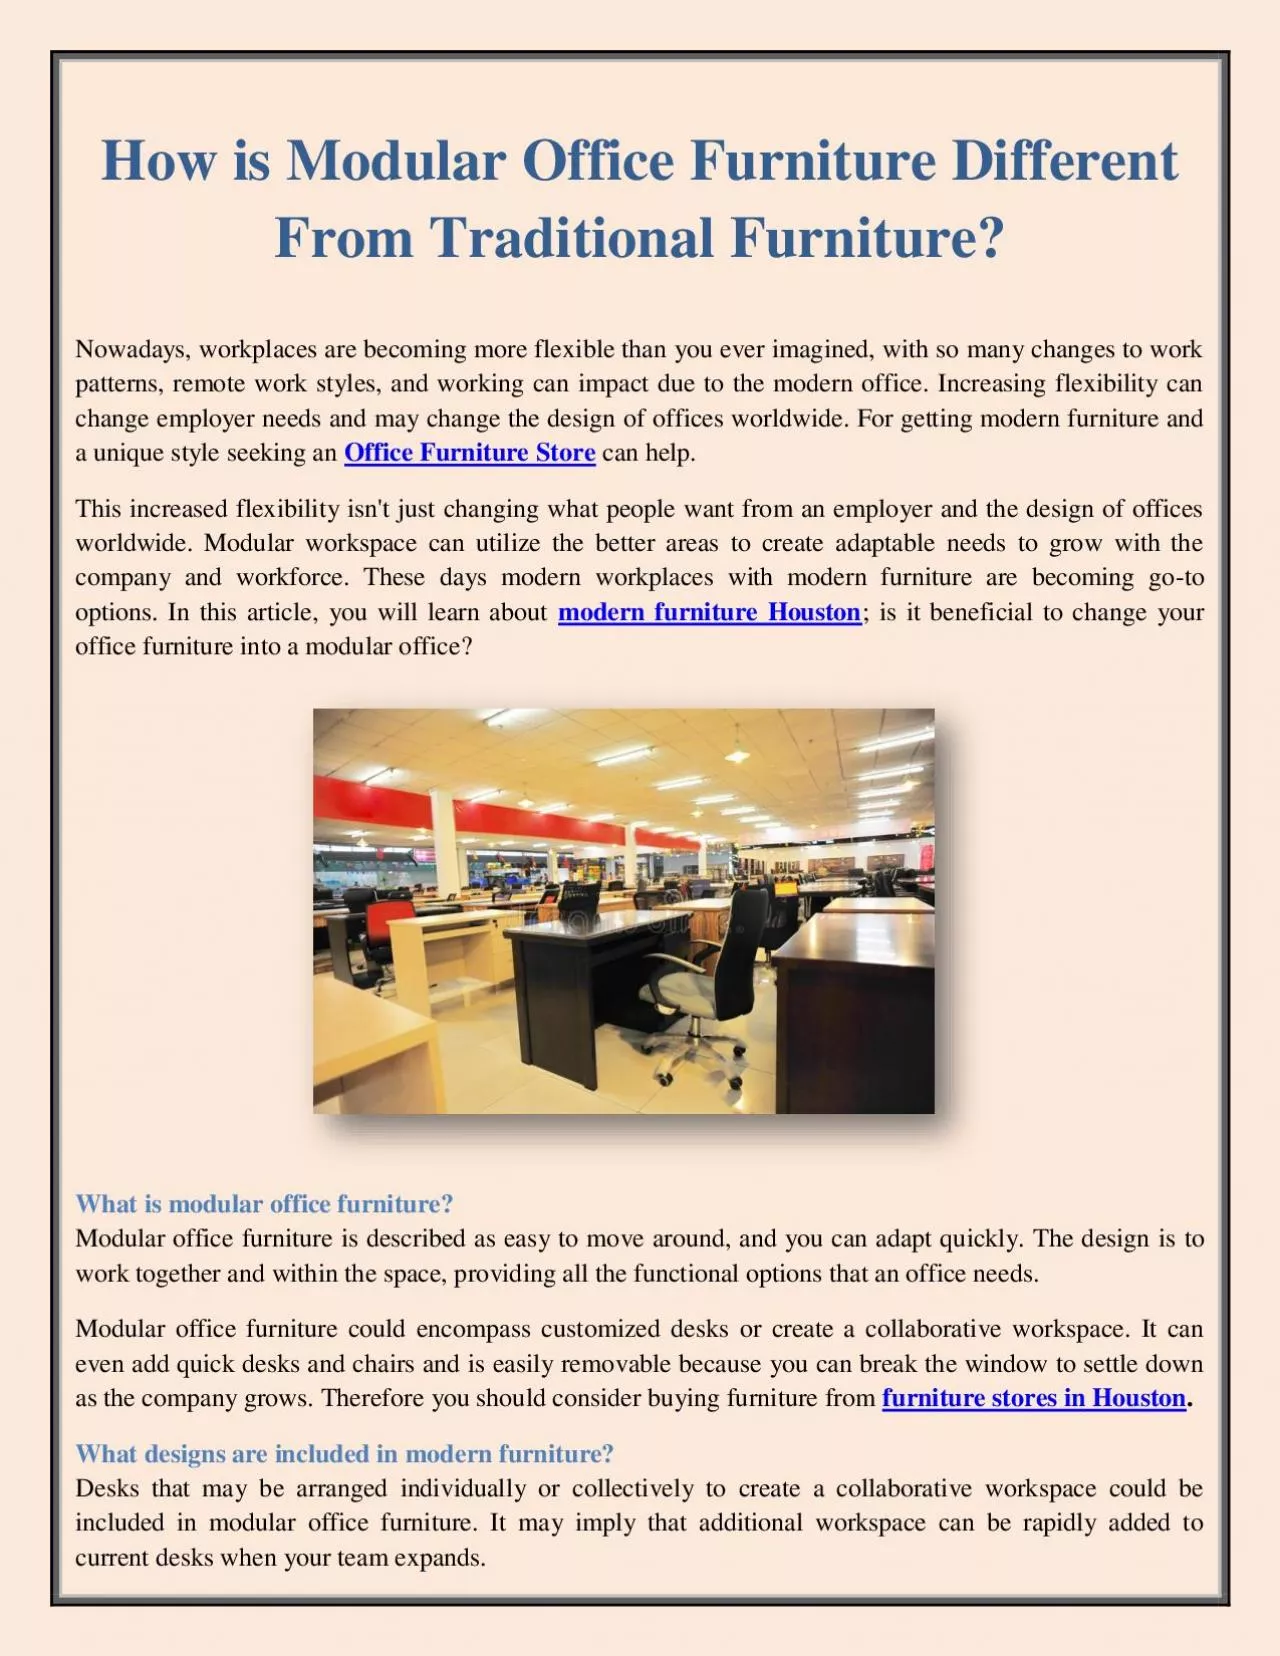 How is Modular Office Furniture Different From Traditional Furniture?